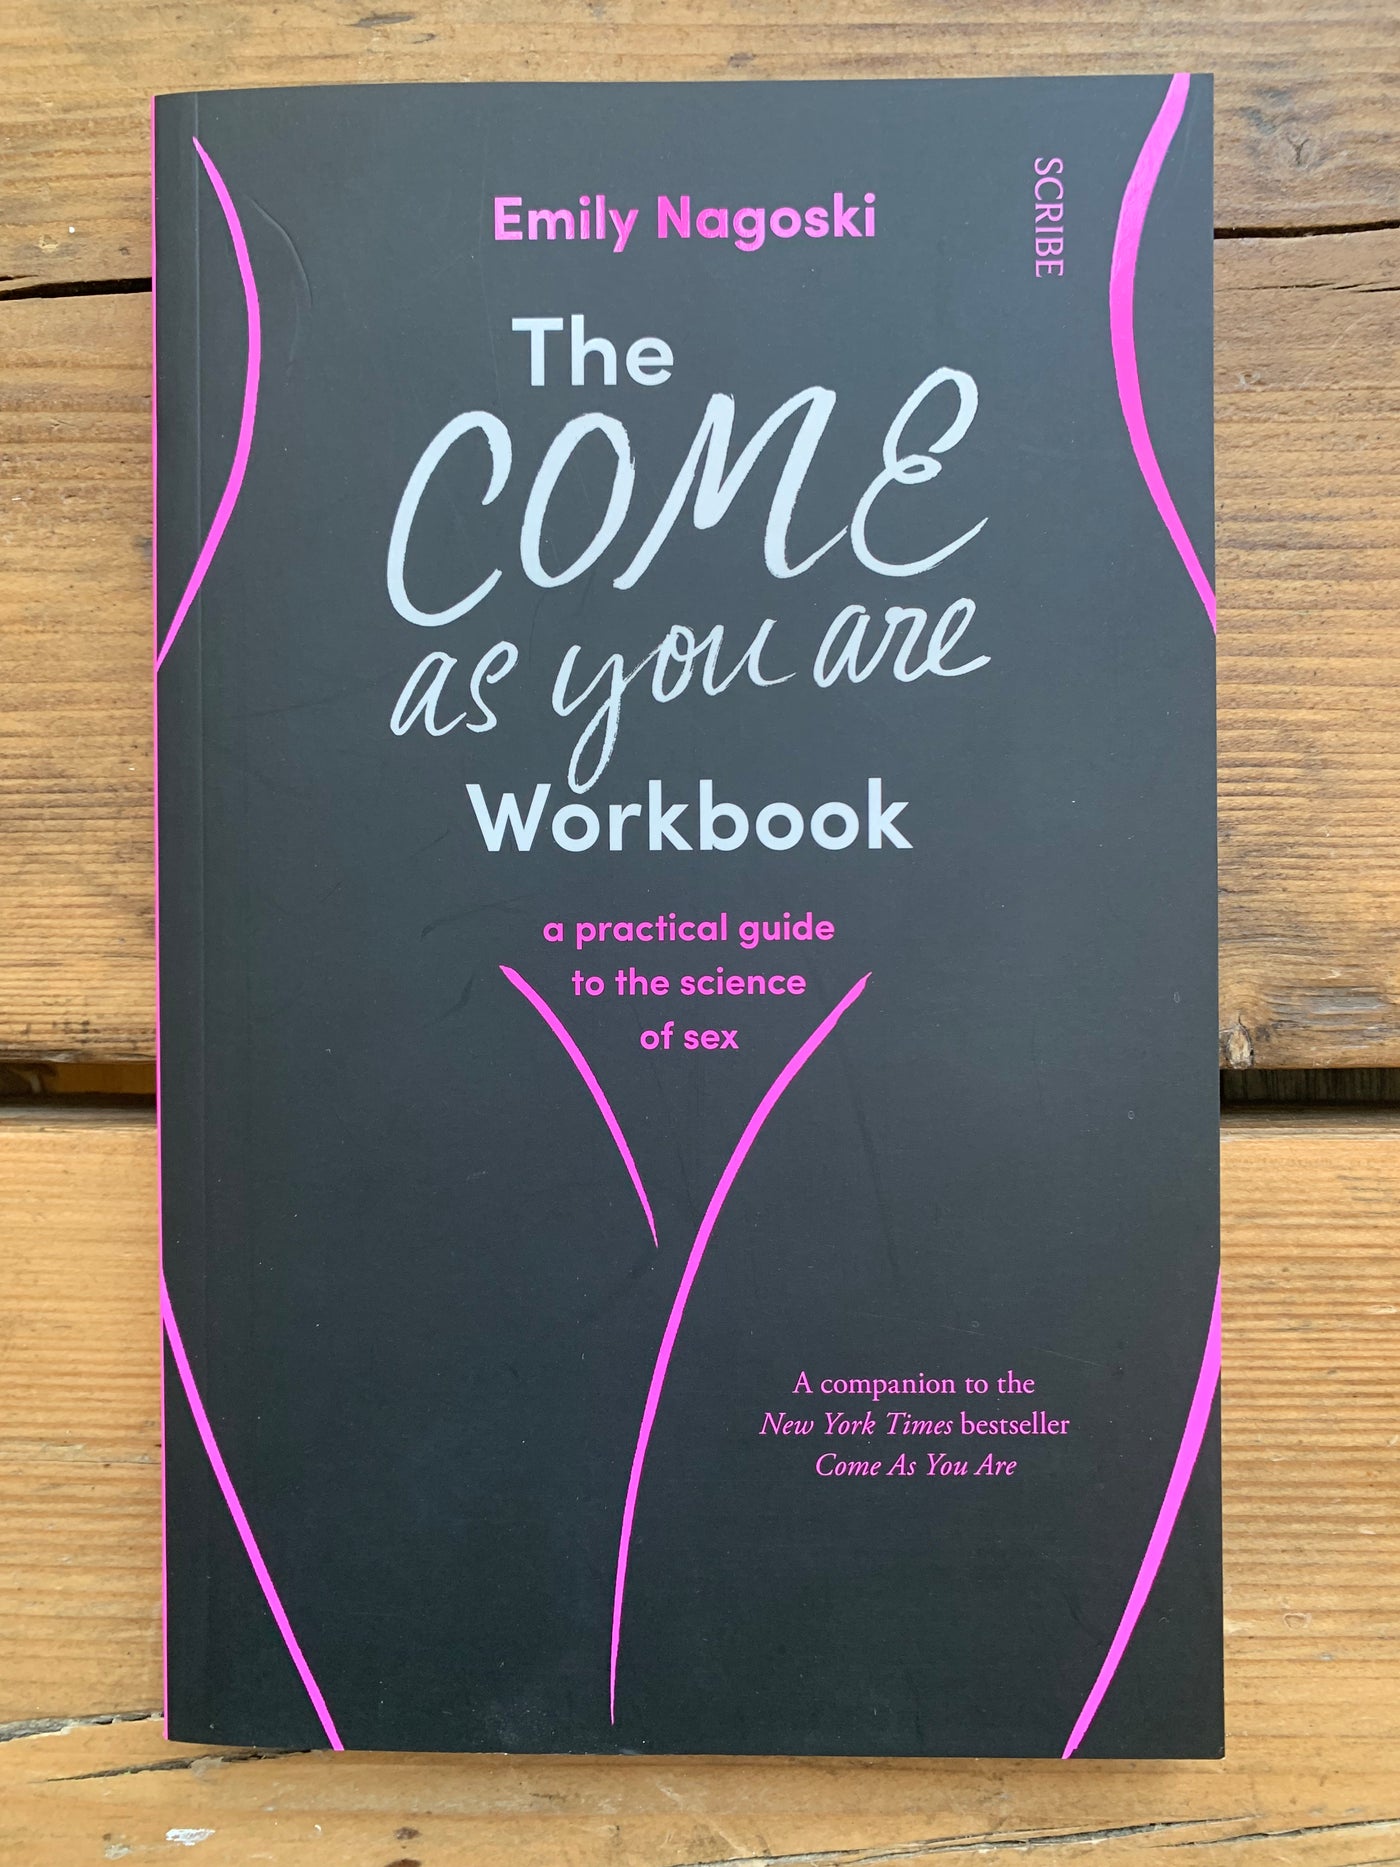 The Come As You Are Workbook